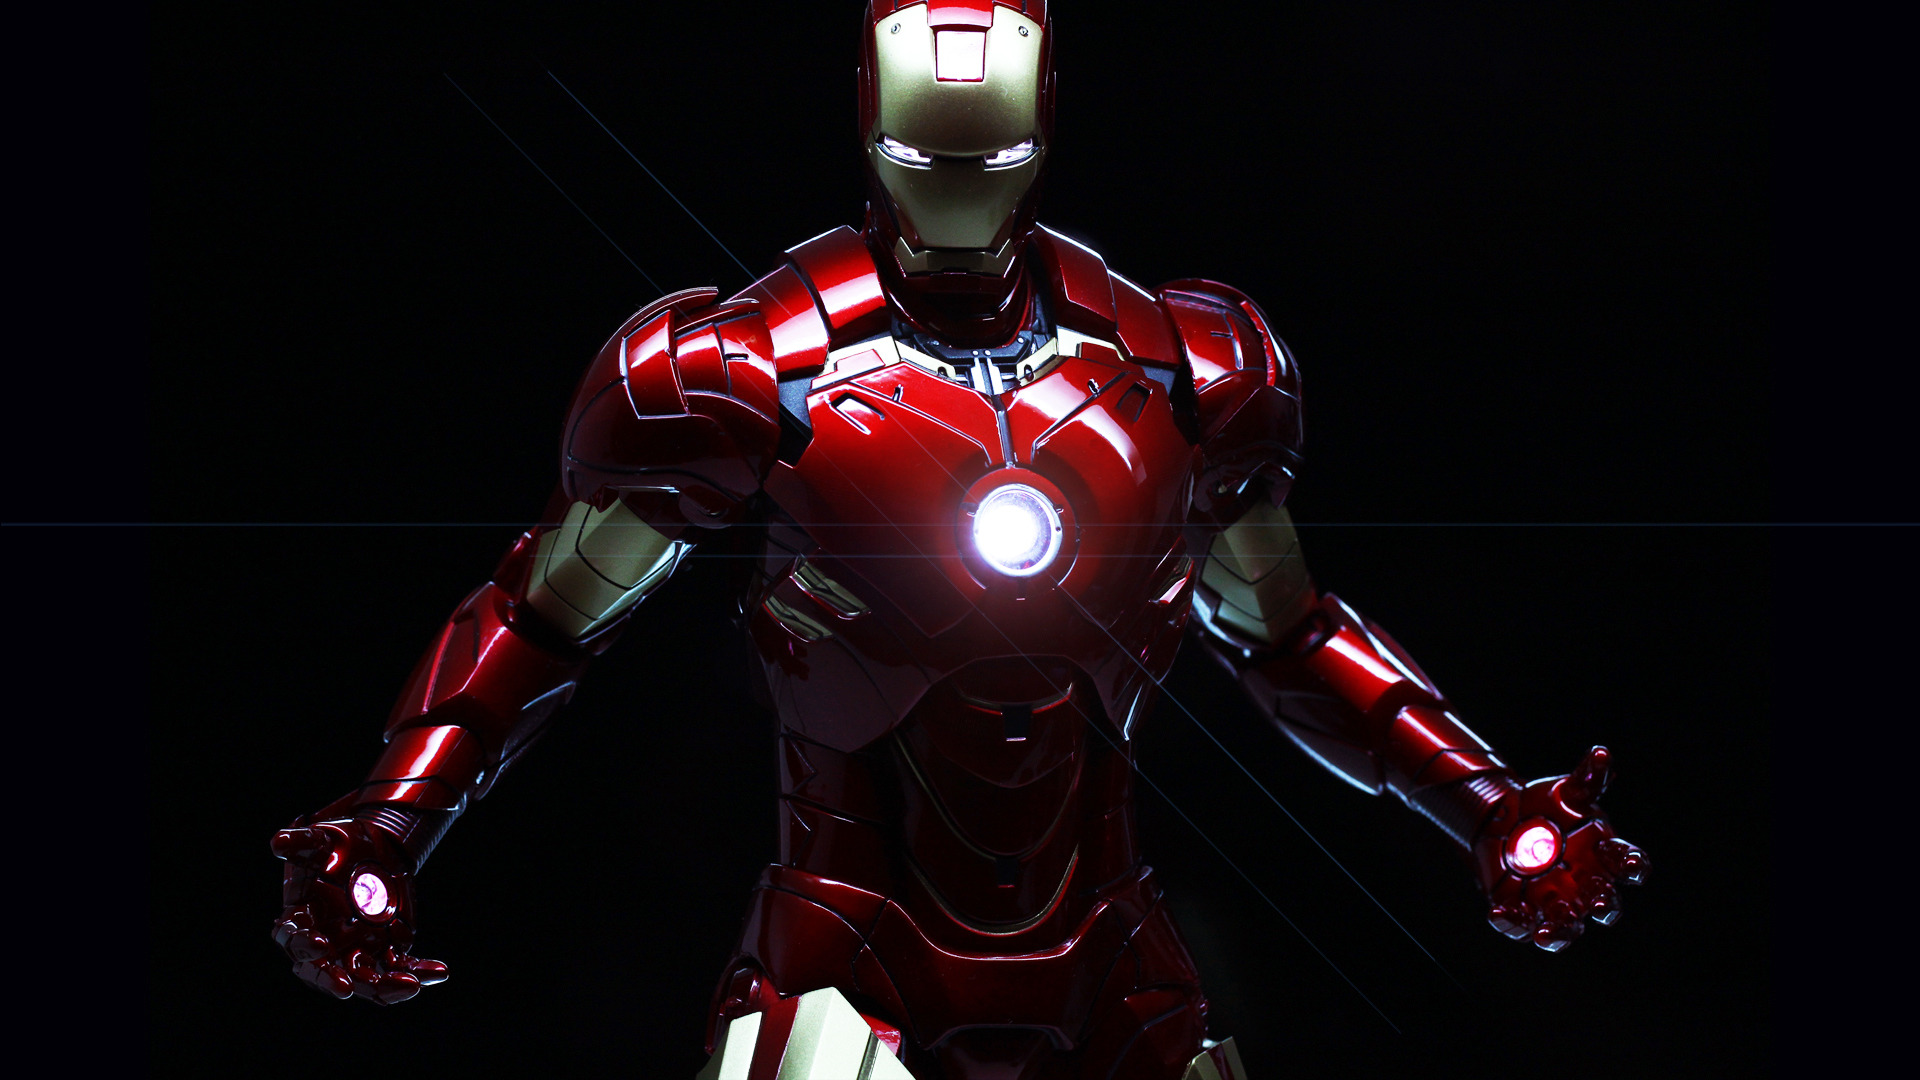 wallpaper details file name iron man wallpaper hd uploaded by